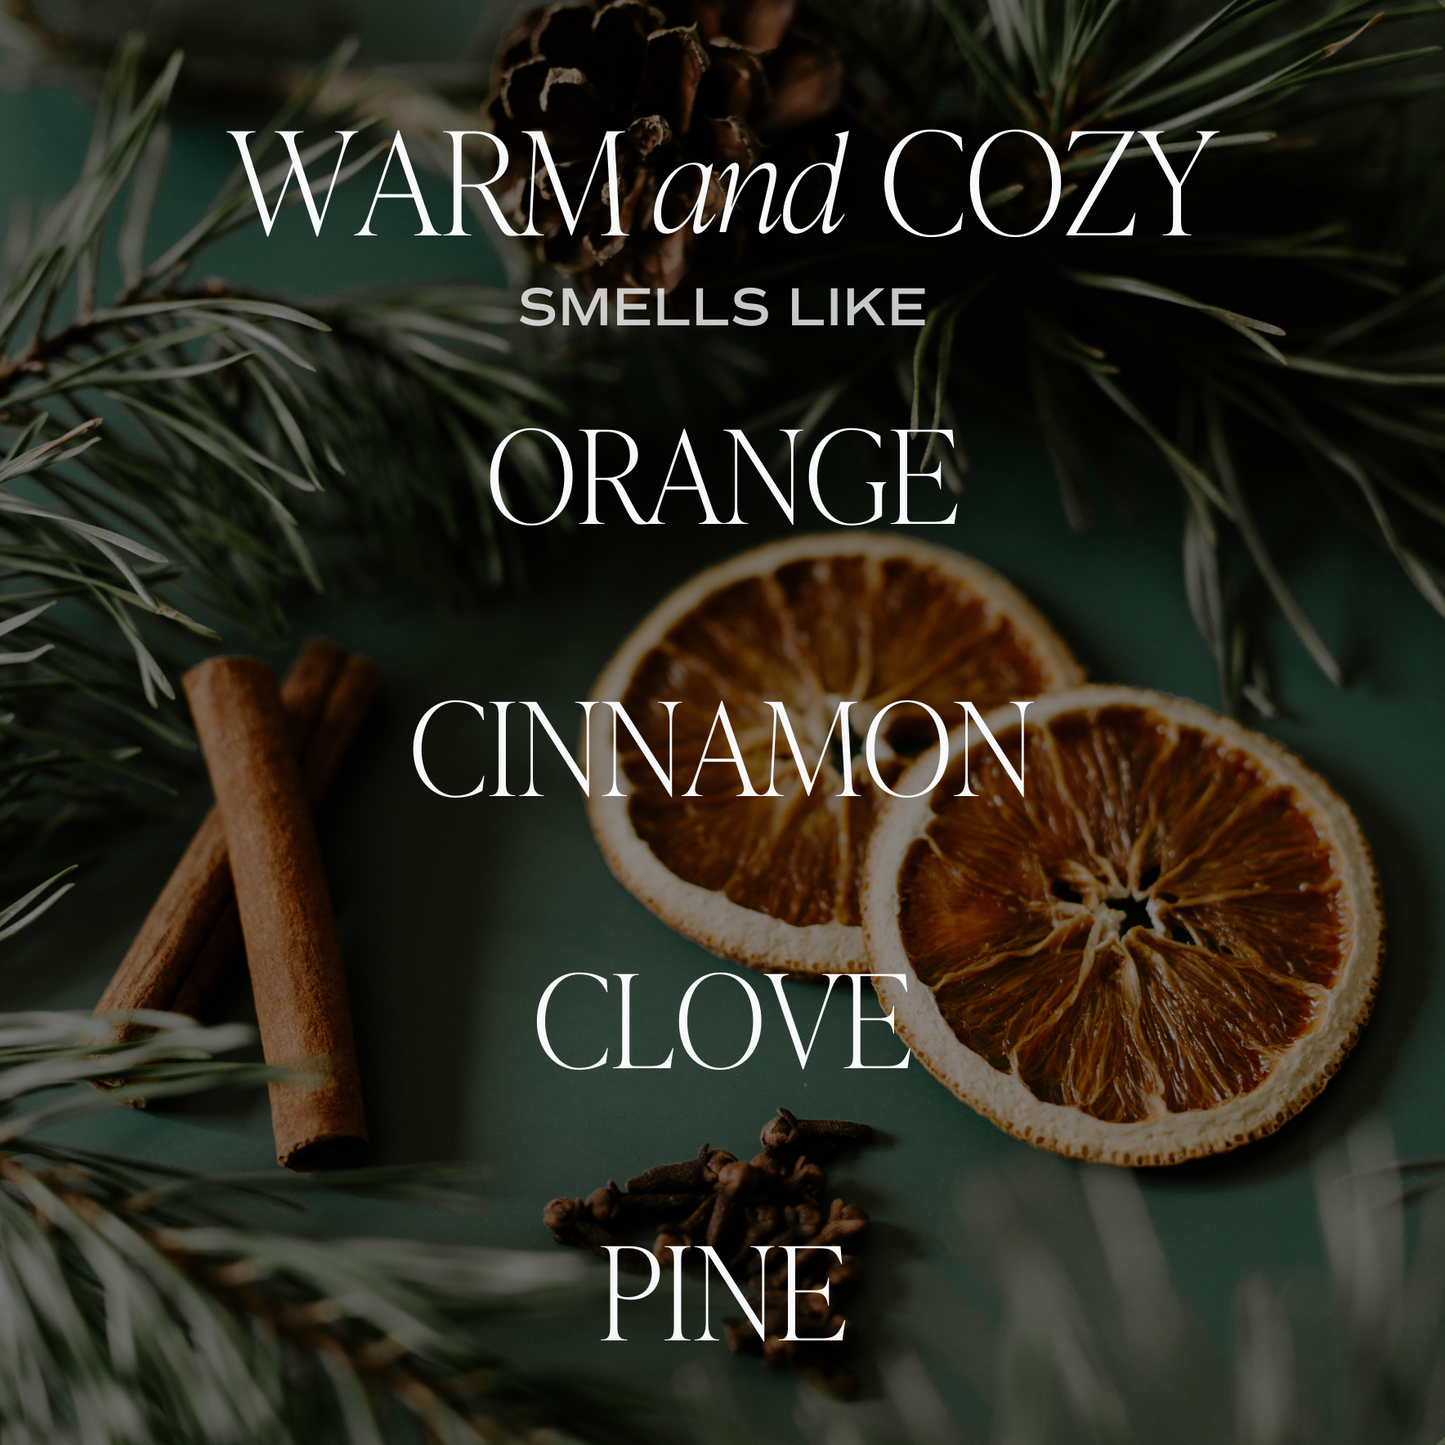 Warm and Cozy Reed Diffuser - Christmas Home Decor & Gifts